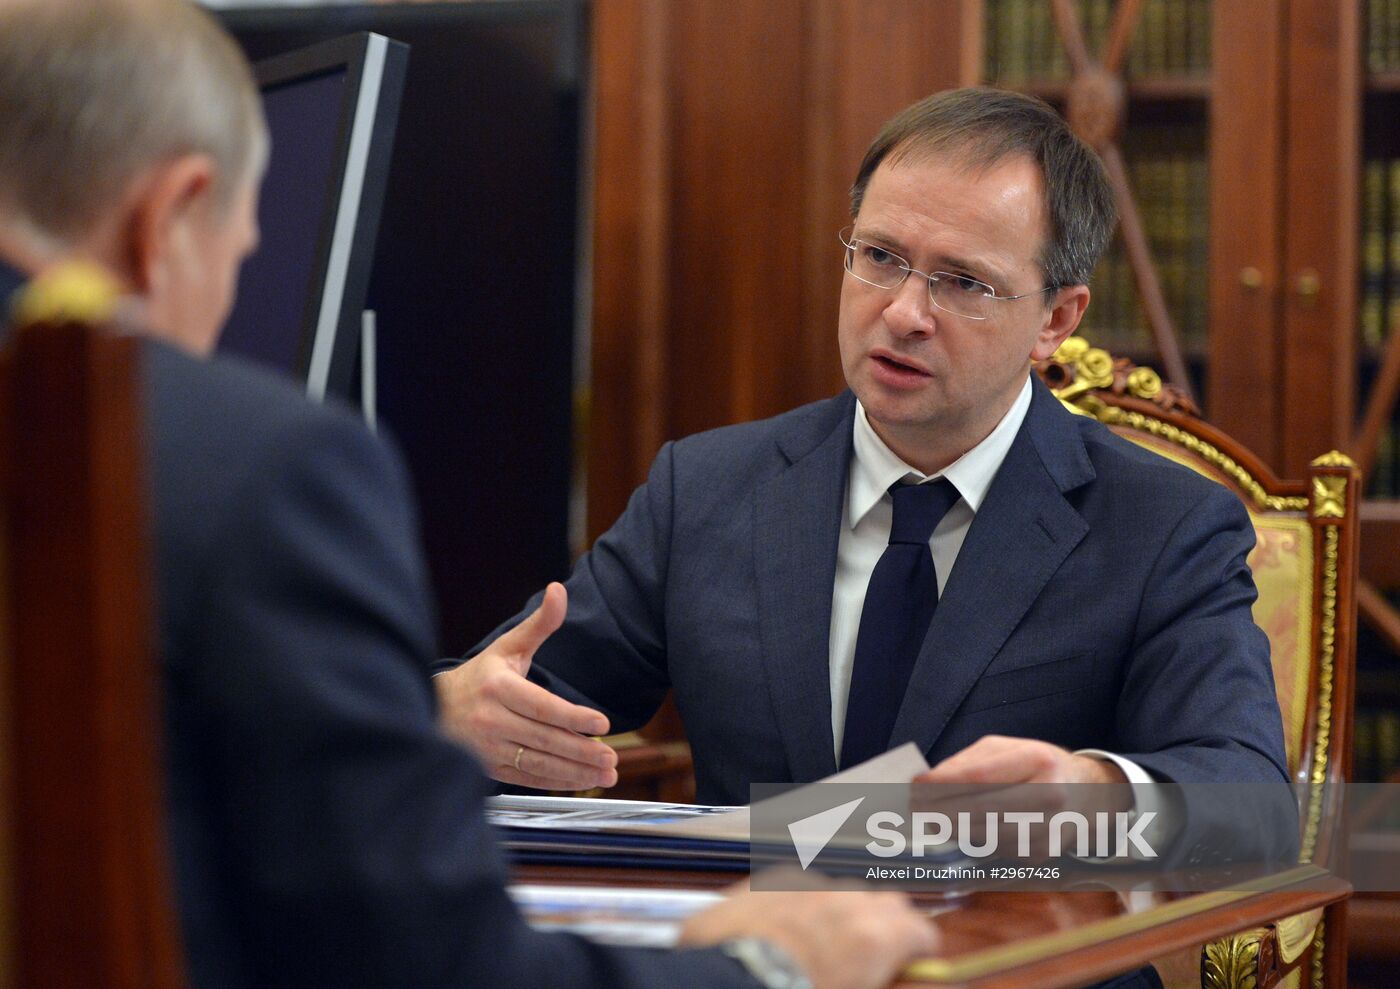 Russian President Putin meets with Culture Minister Medinsky